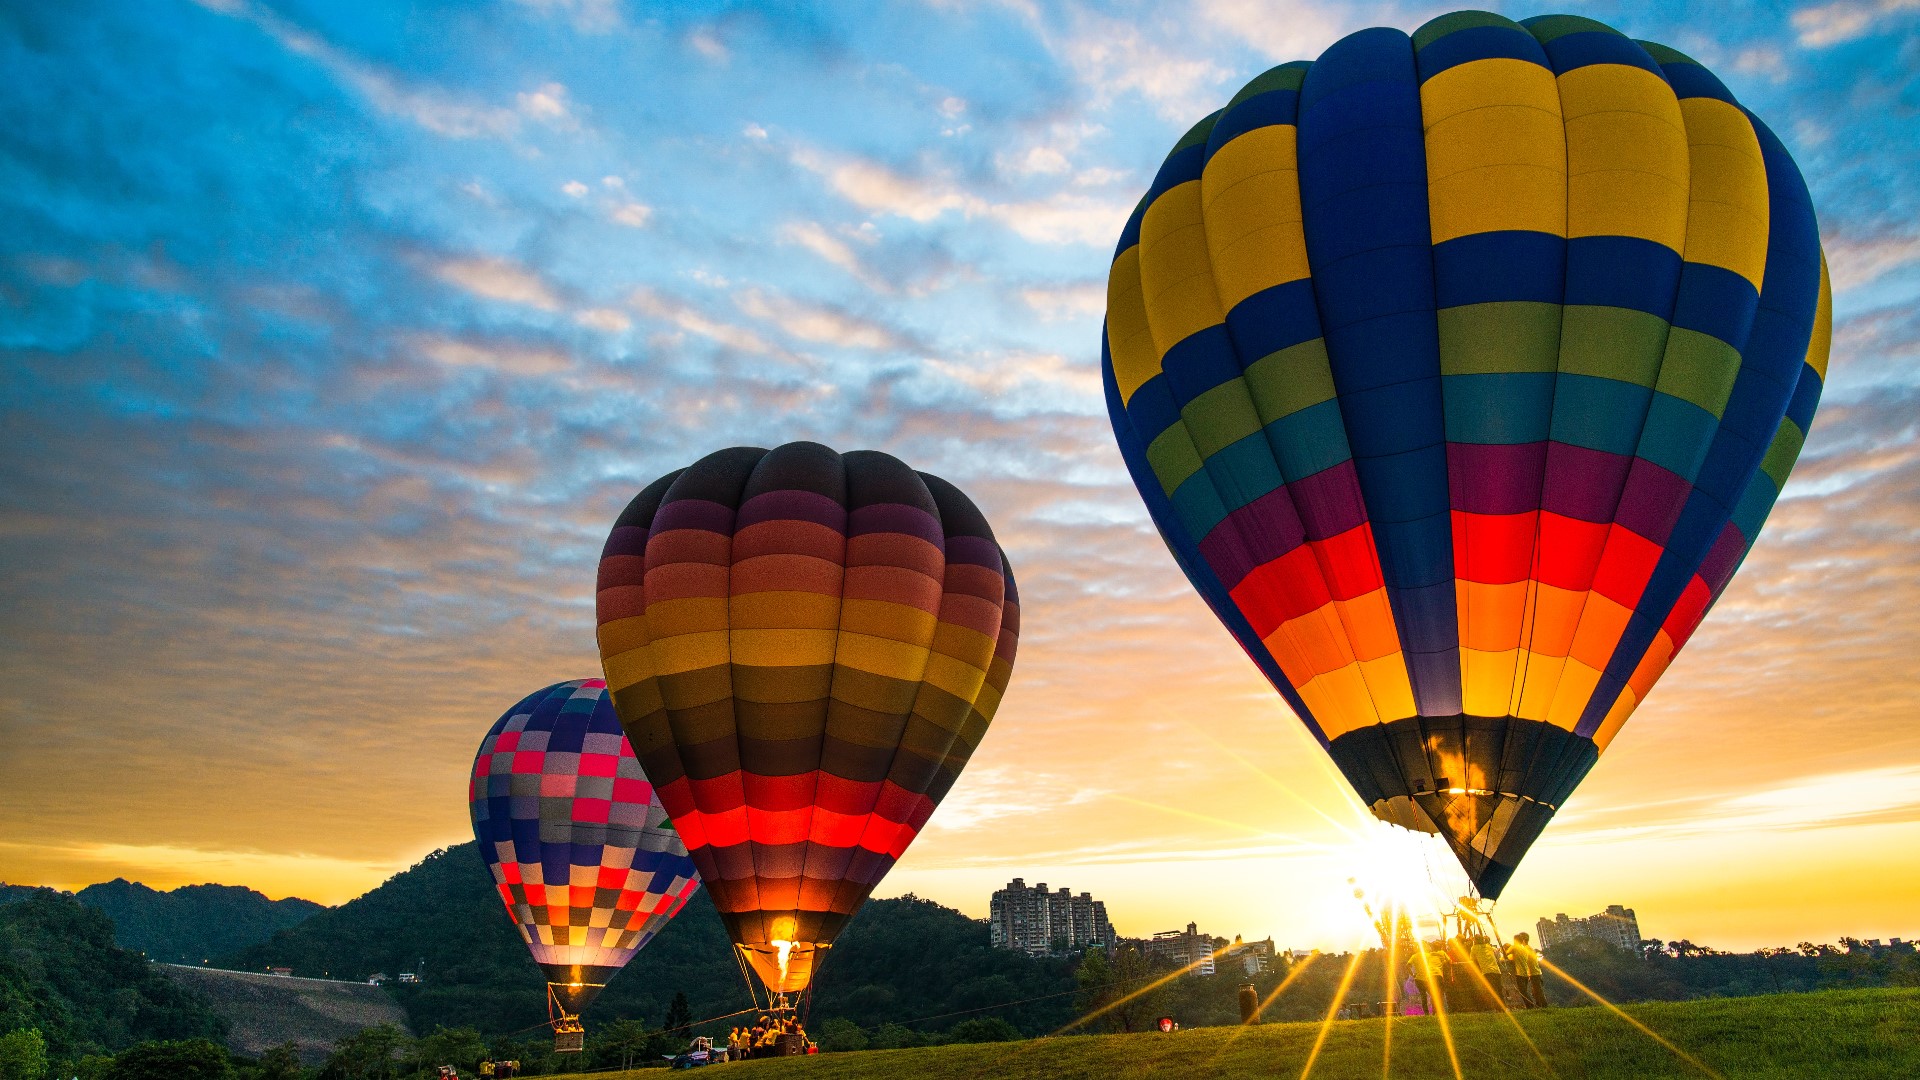 The weekend festival starts on Friday, Aug. 26 at 5 p.m. and is expected to offer something for everyone, including a variety of hot air balloon activities.